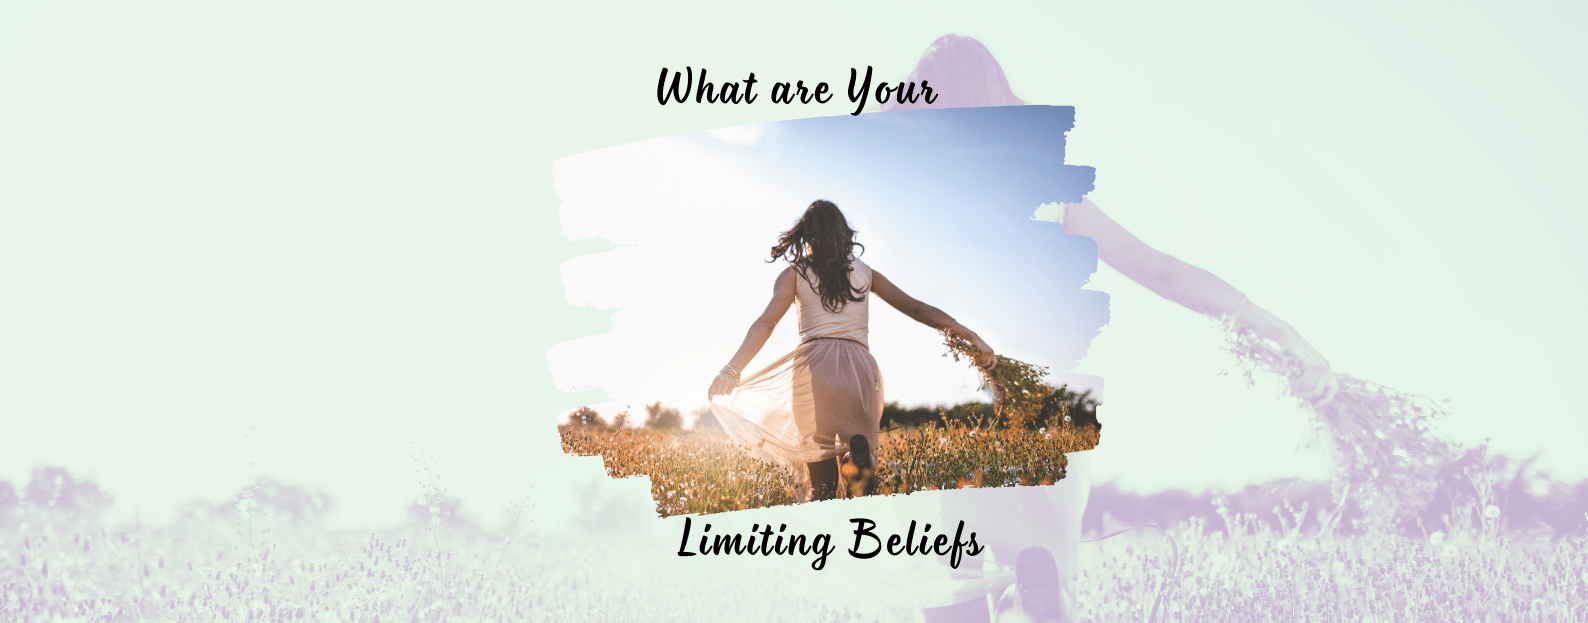 What are your limiting beliefs